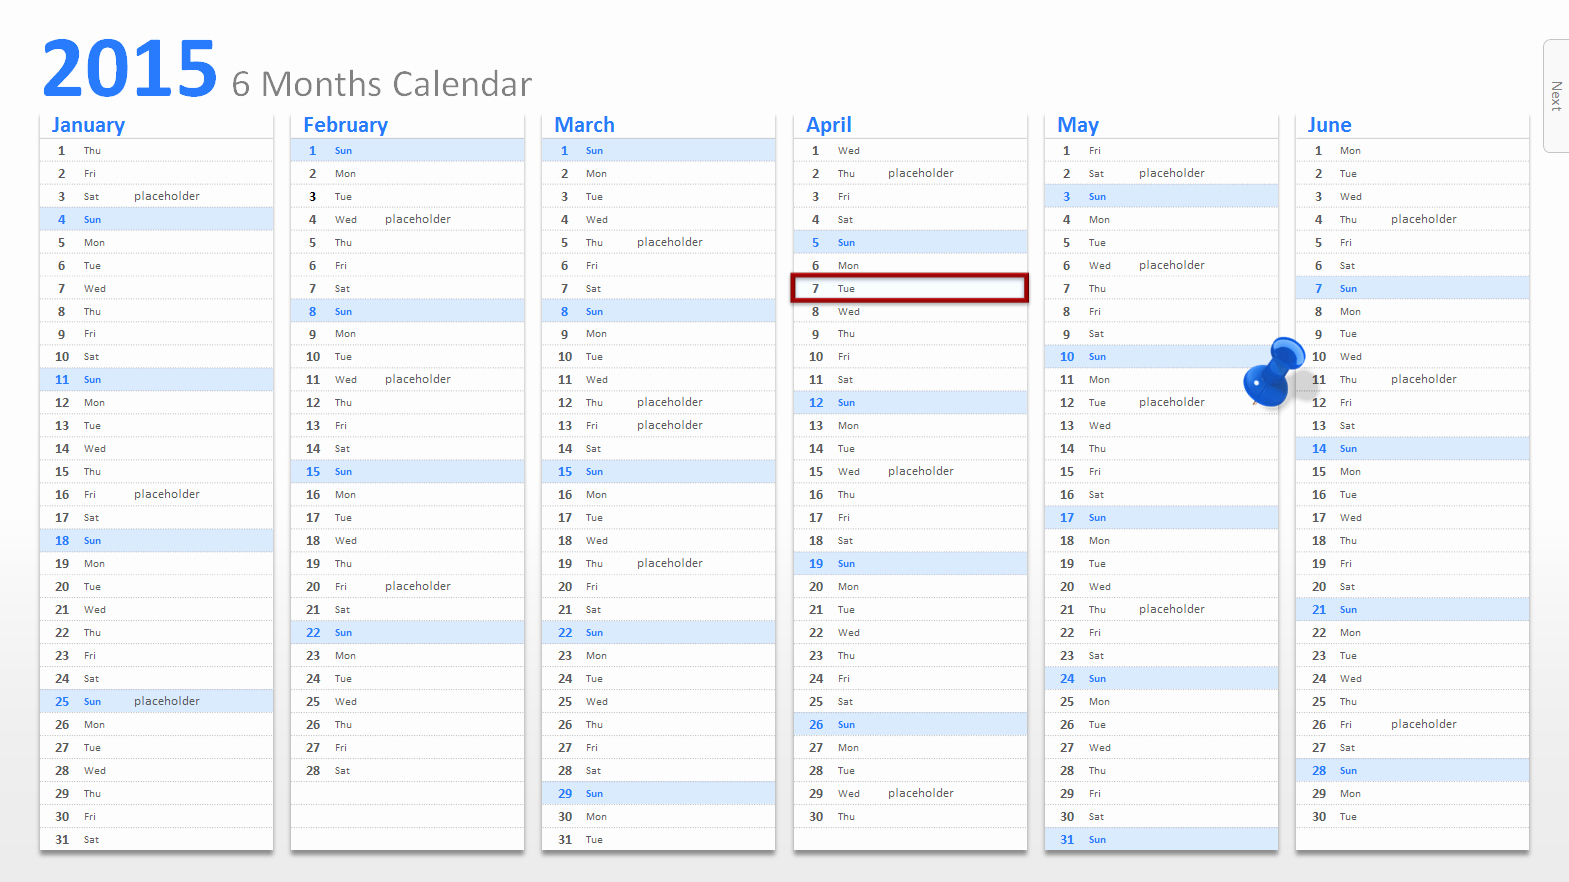 Calendar Template for Powerpoint Unique Powerpoint Calendar the Perfect Start for 2015